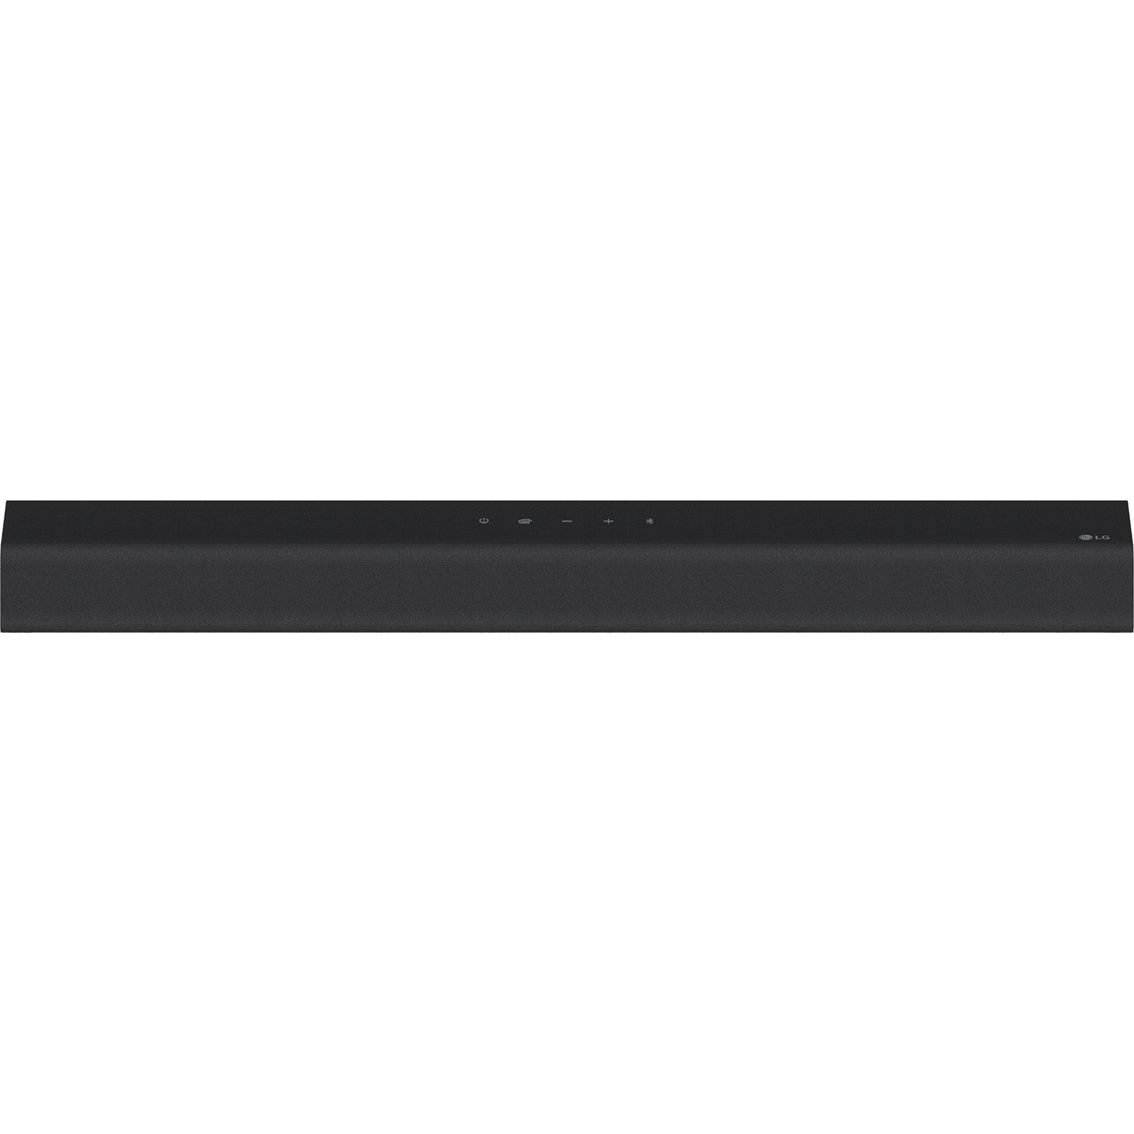 LG S40W 2.1 Channel 300W Sound Bar with Wireless Subwoofer - Image 5 of 7